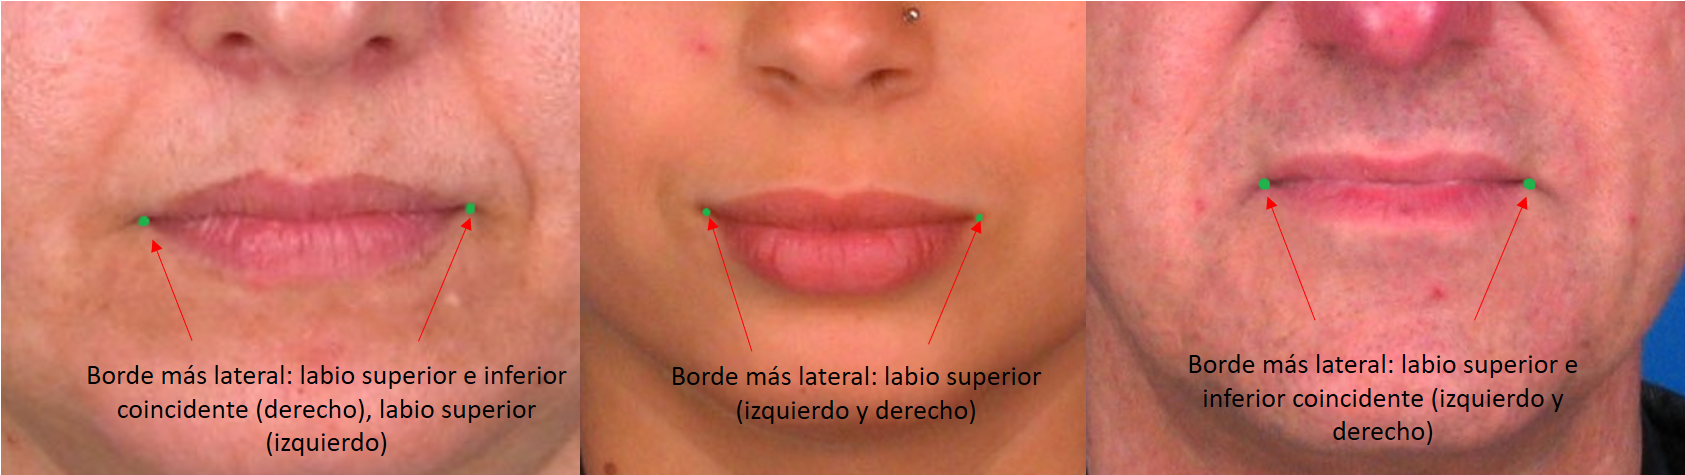 Examples of subjects with different junction points of the upper and lower lips in the rima oris